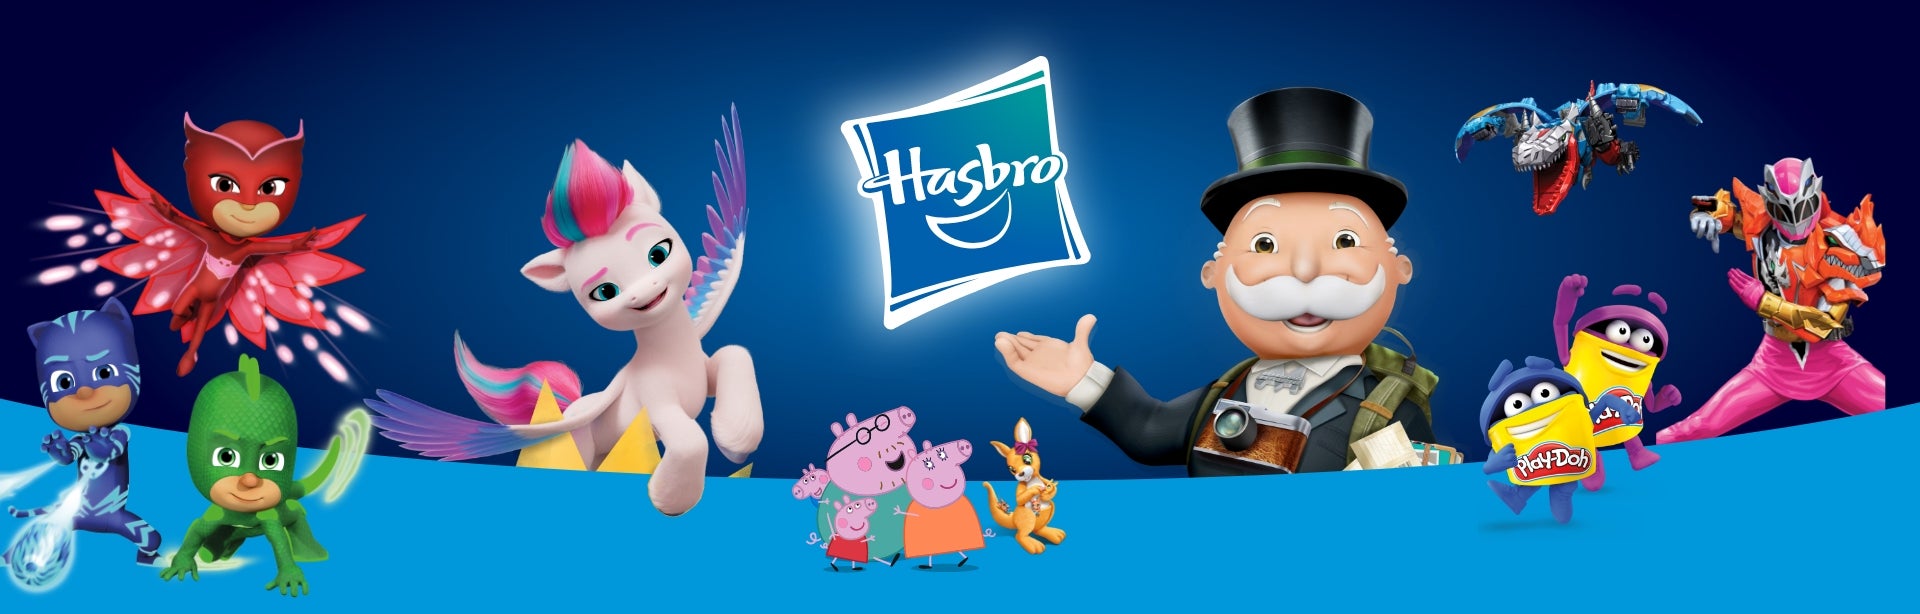 hasbro toys and games, kids toys, action figures, and board games - hasbro